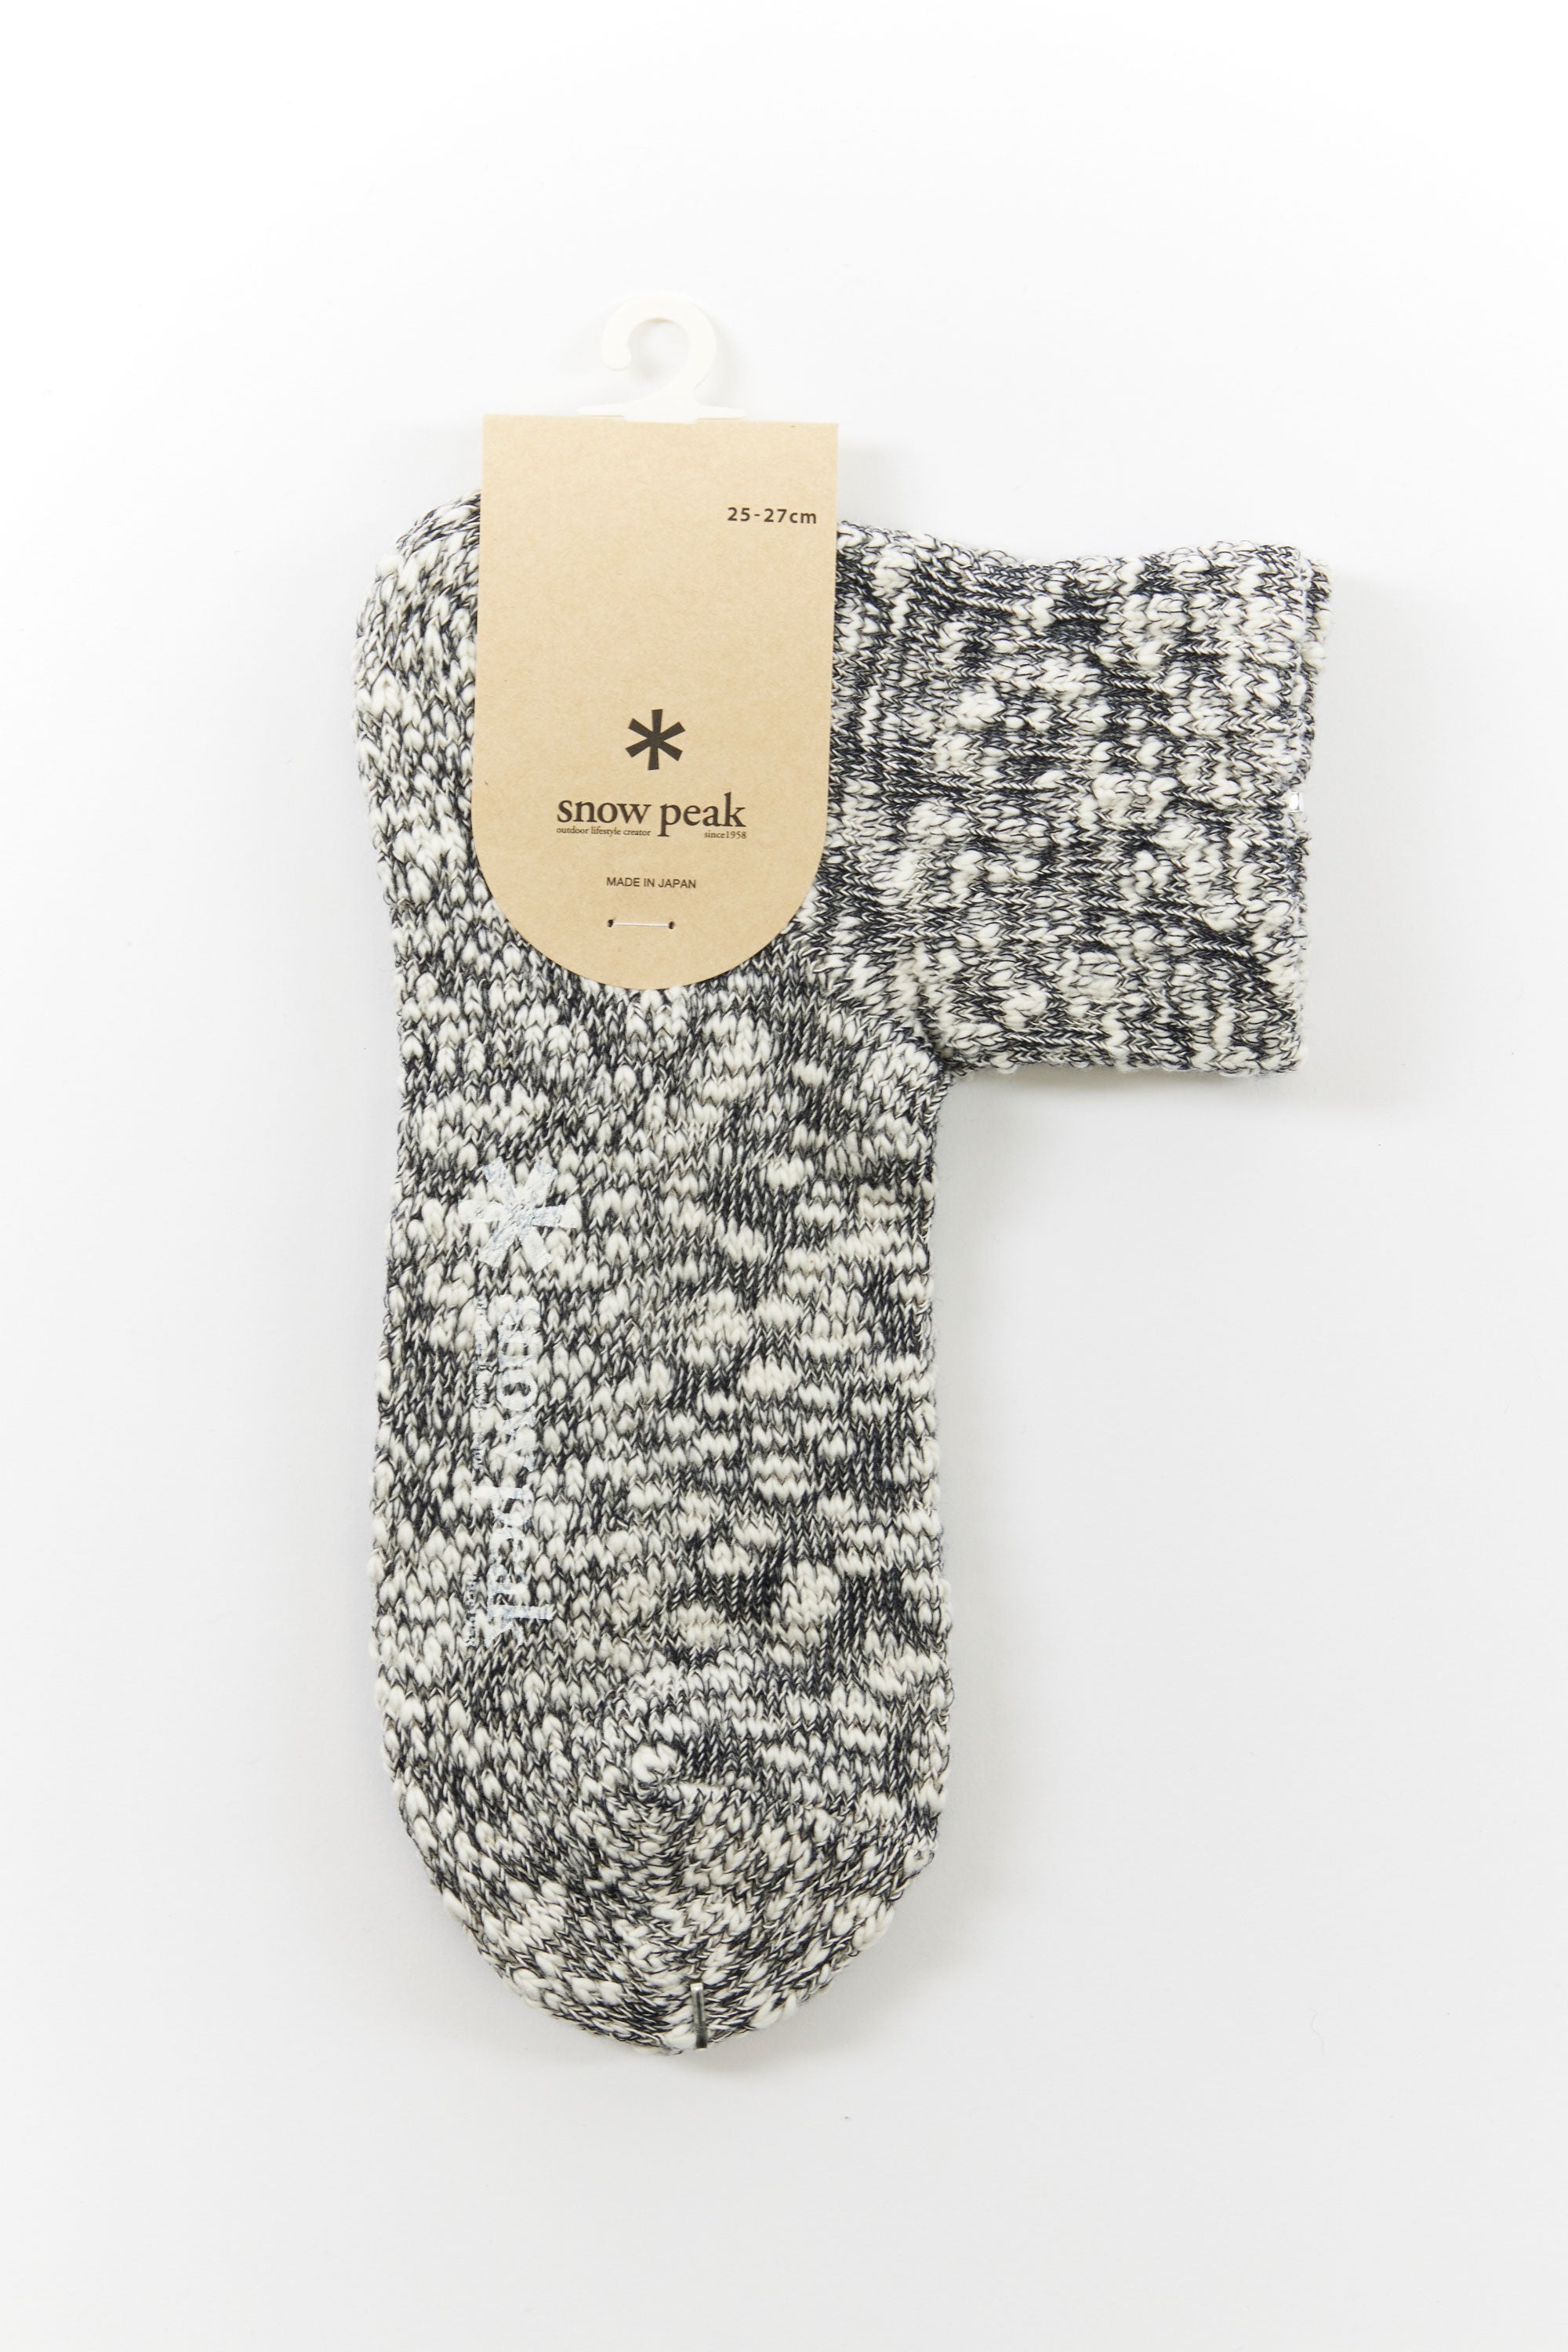 The SNOW PEAK - GARA GARA SOCK NAVY available online with global shipping, and in PAM Stores Melbourne and Sydney.